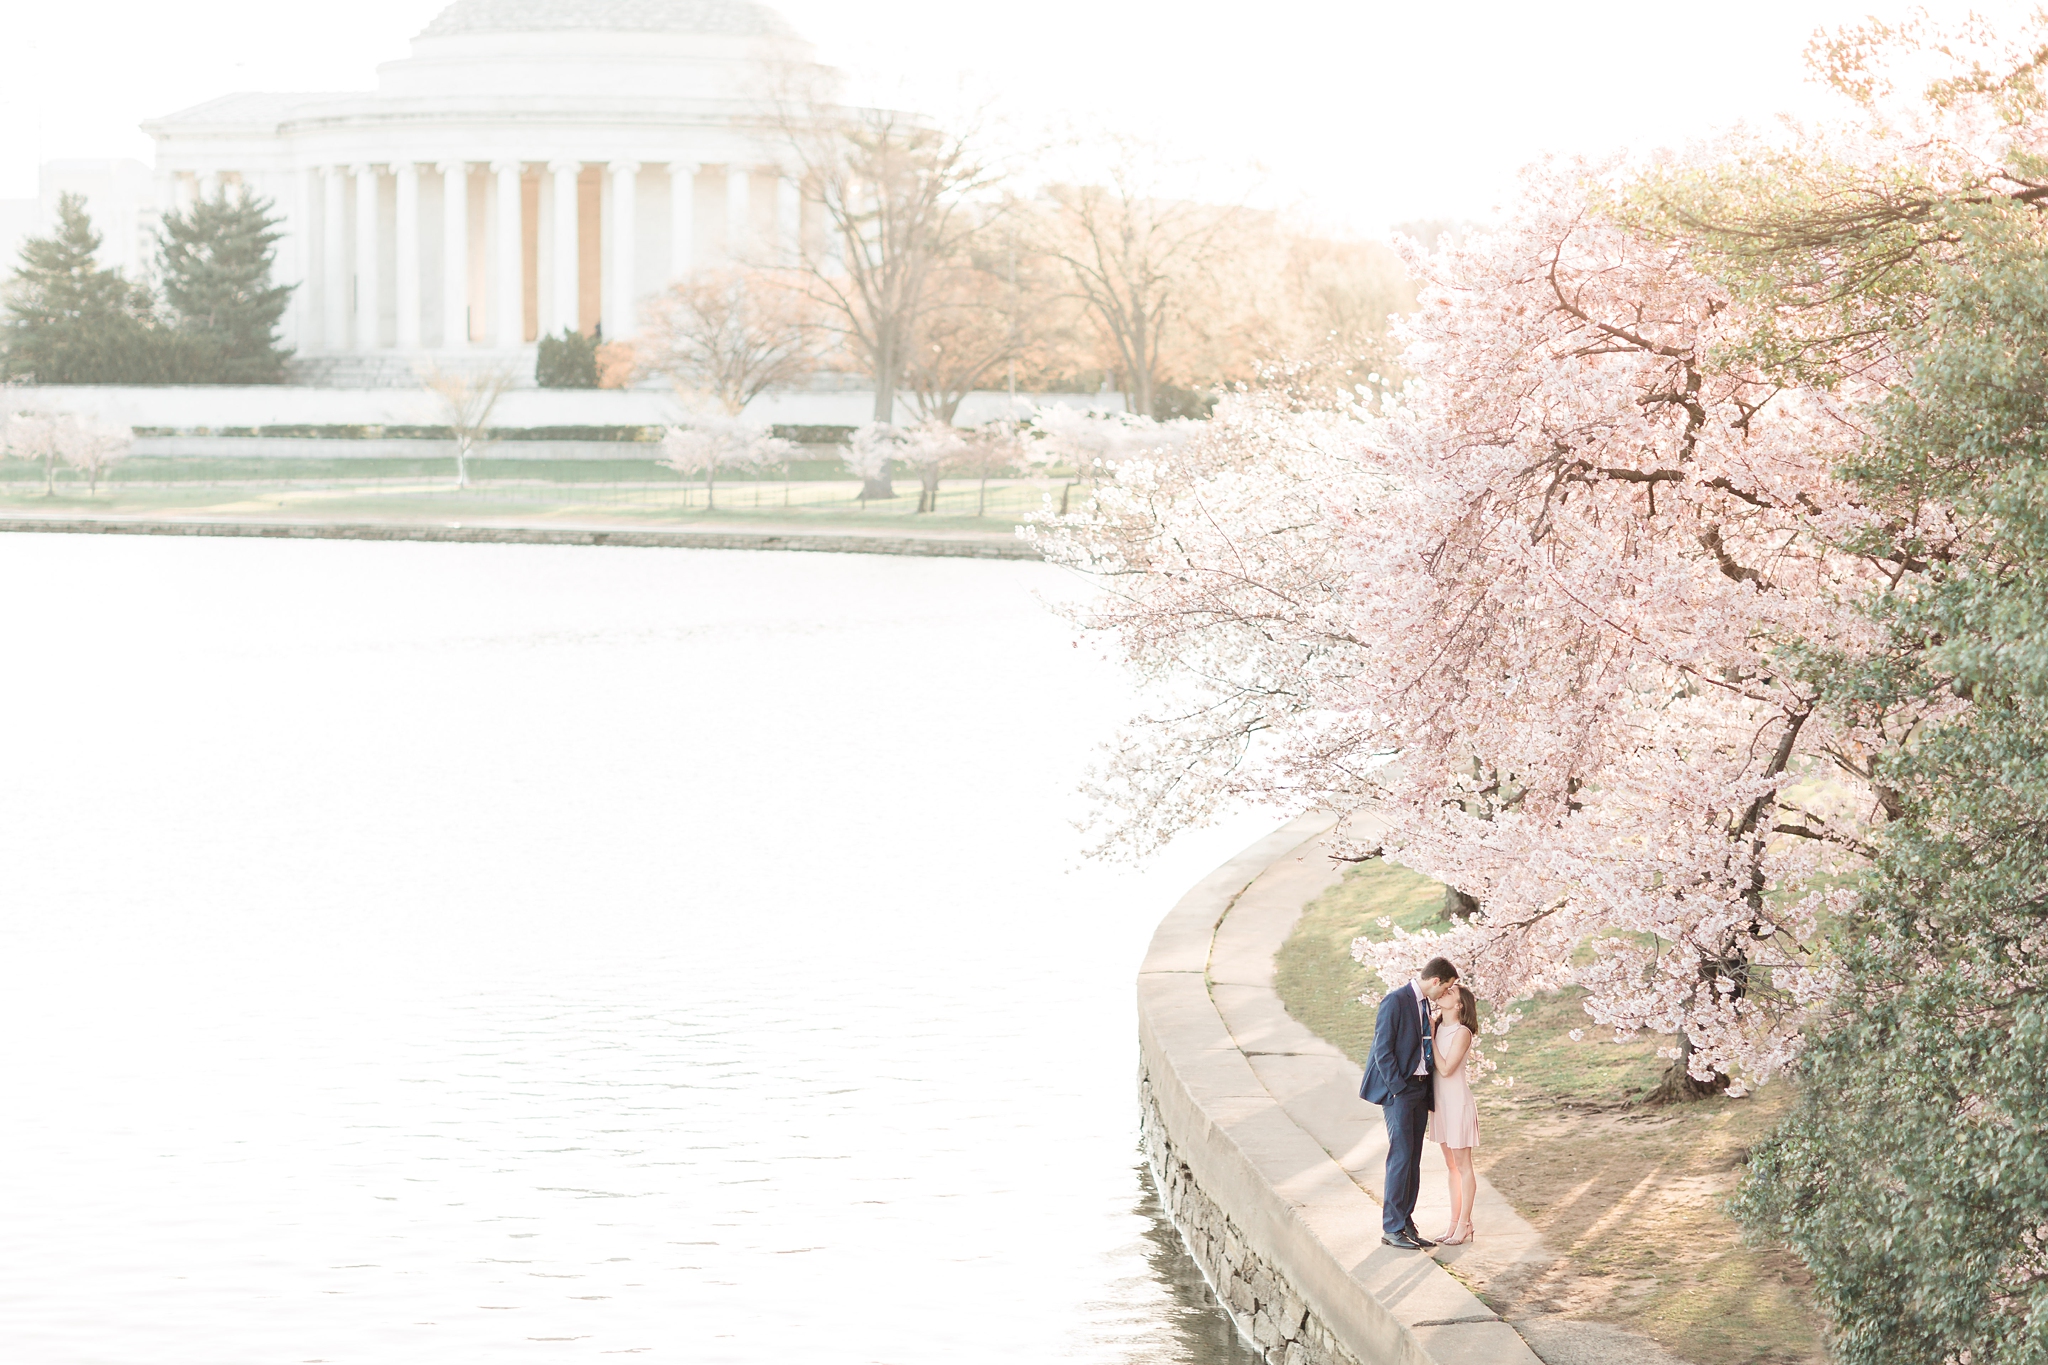 Here is the ultimate photography guide to cherry blossom engagement photos at the Tidal Basin in Washington, DC!